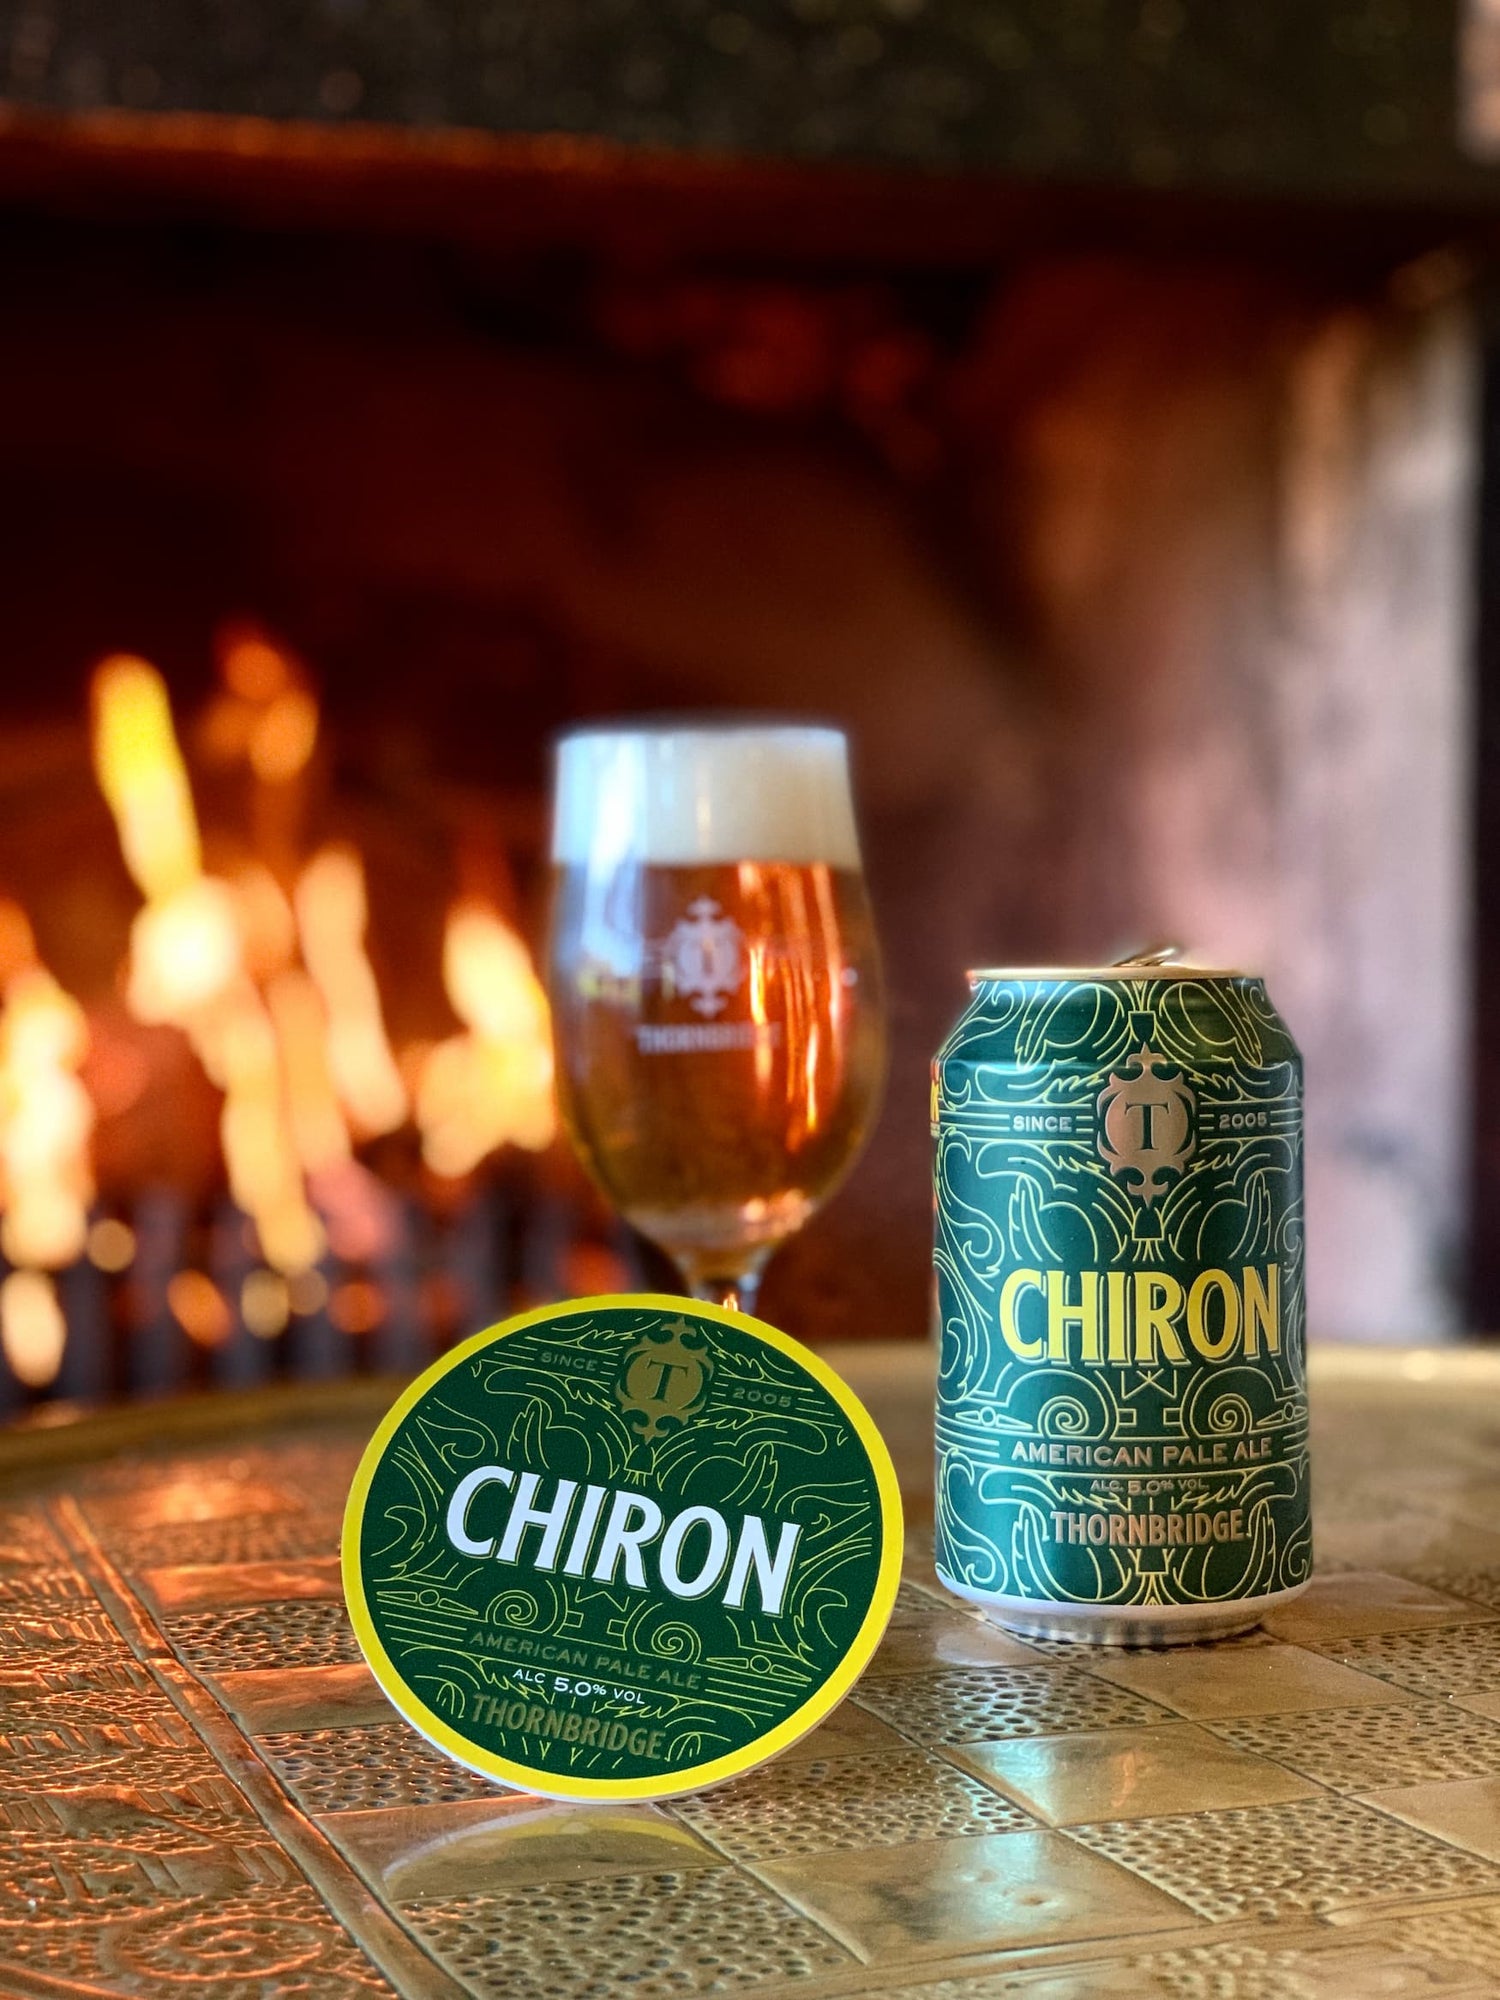 Chiron by the fireside in a Thornbridge Pub